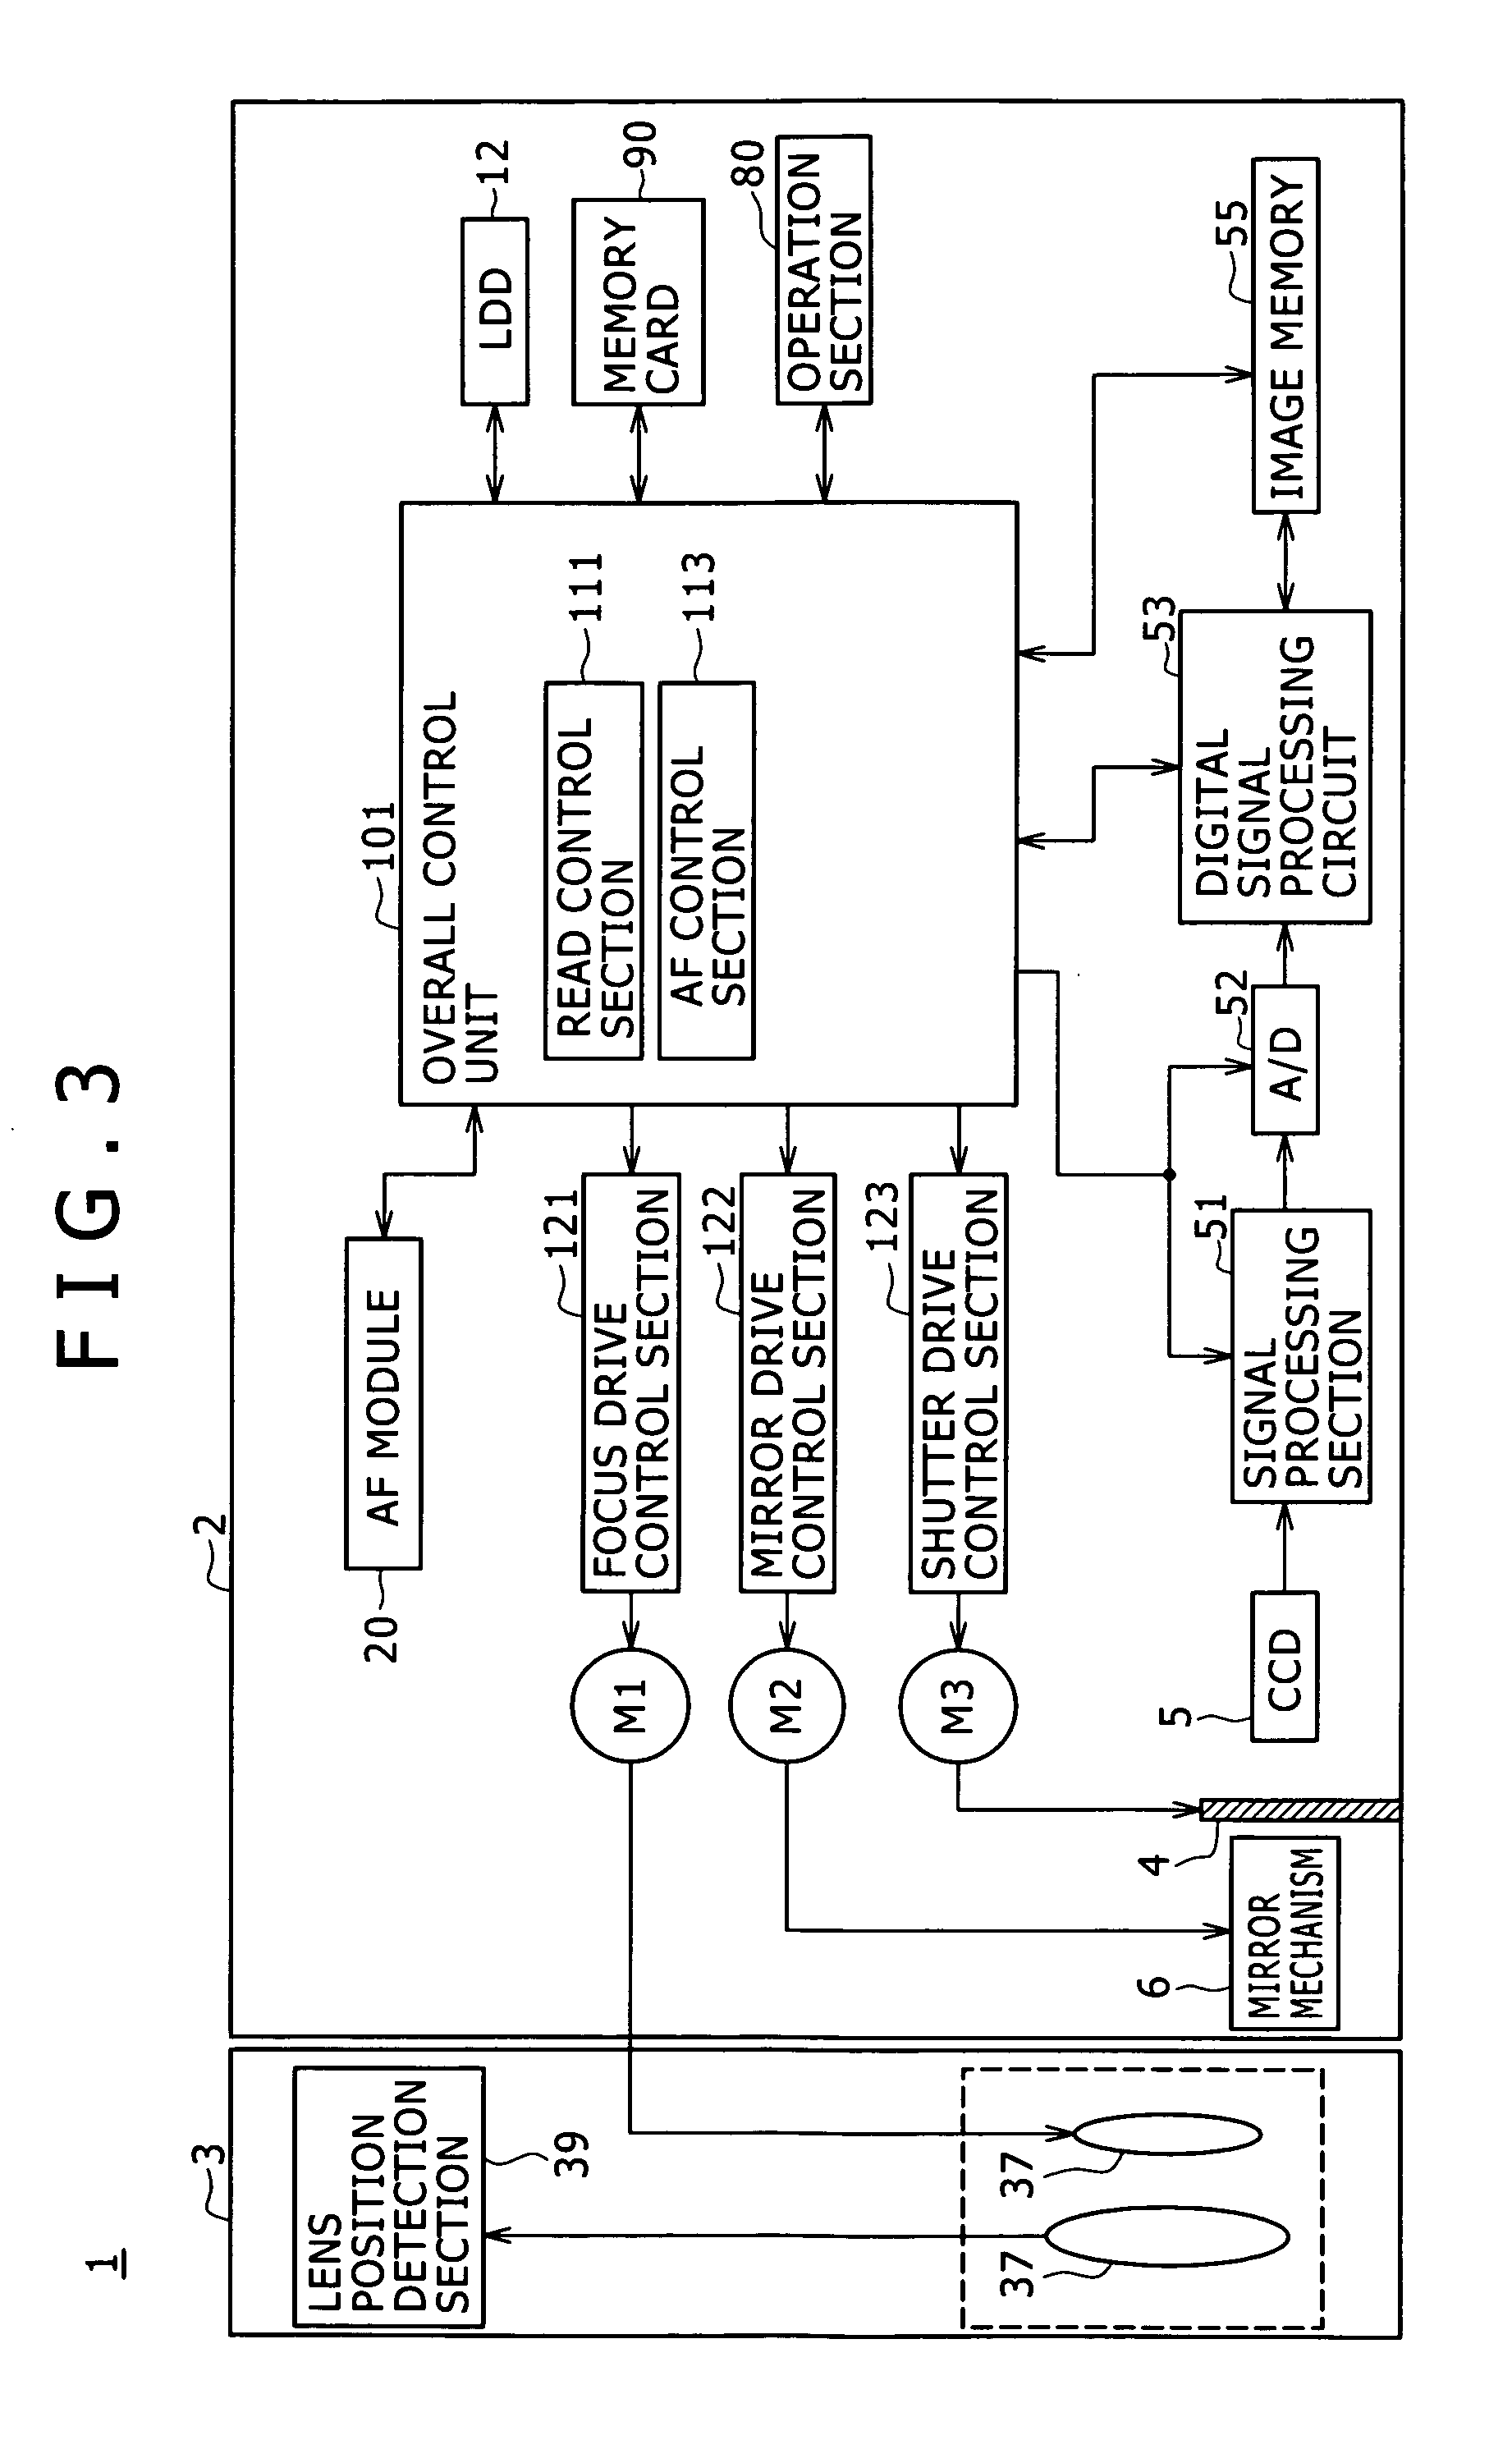 Imaging device and focal point detector